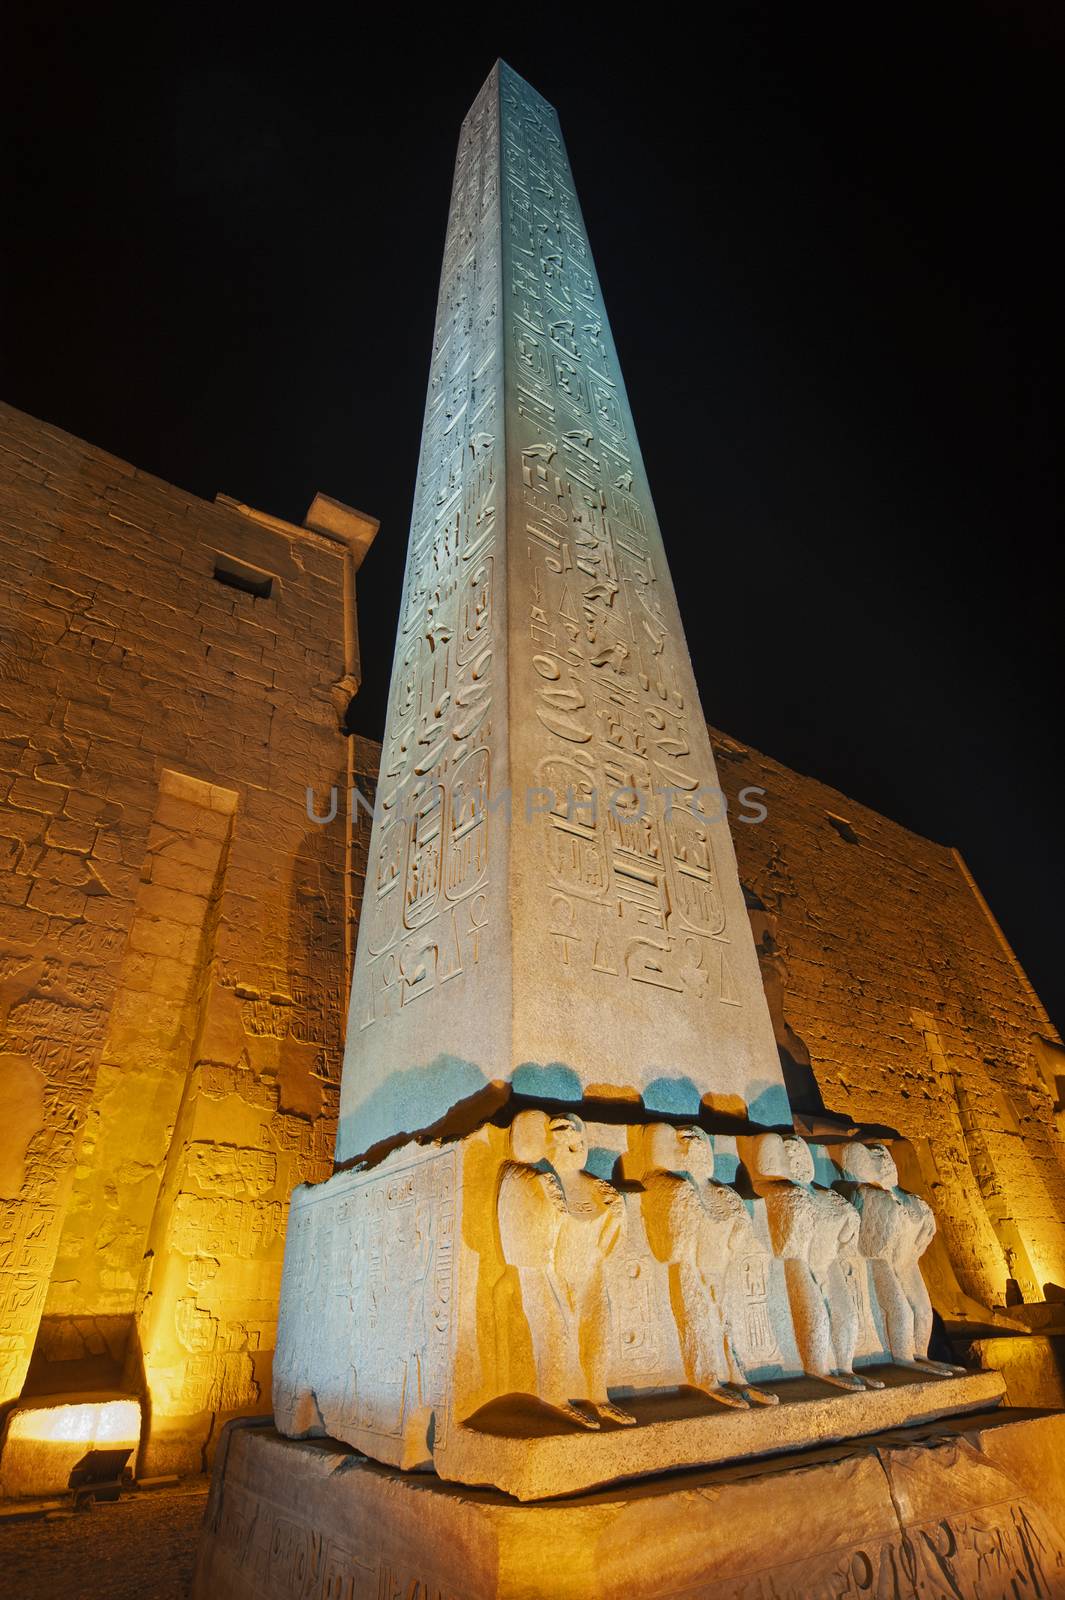 Large obelisk with statues at entrance pylon to ancient egyptian Luxor Temple lit up during night